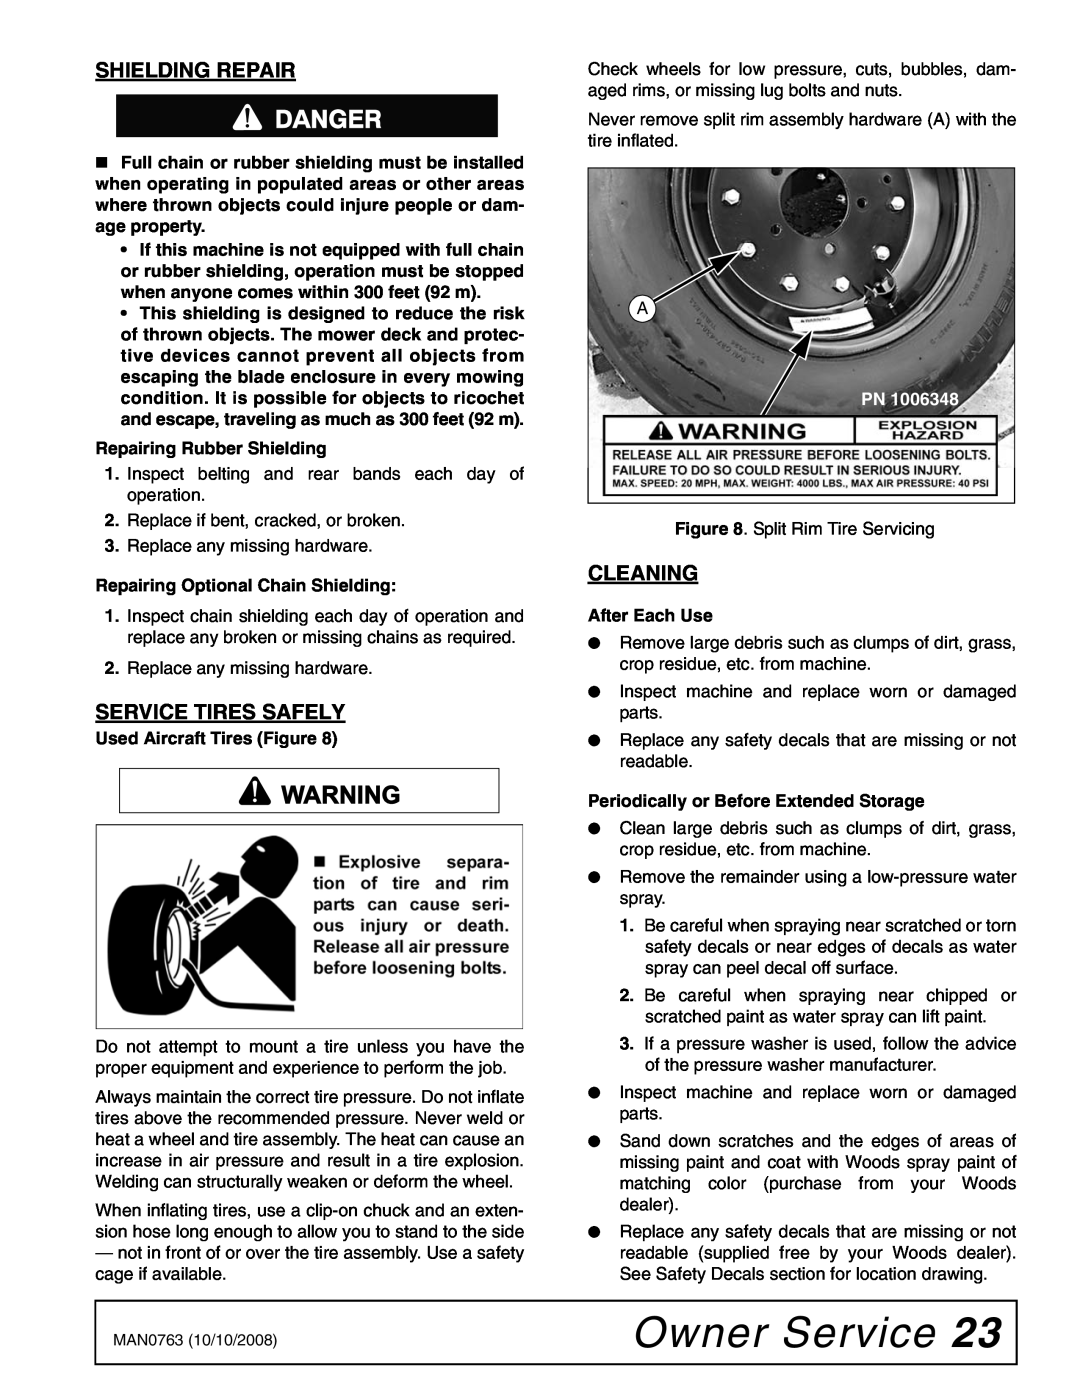 Woods Equipment BW240HDQ manual Owner Service, Shielding Repair, Service Tires Safely, Cleaning 